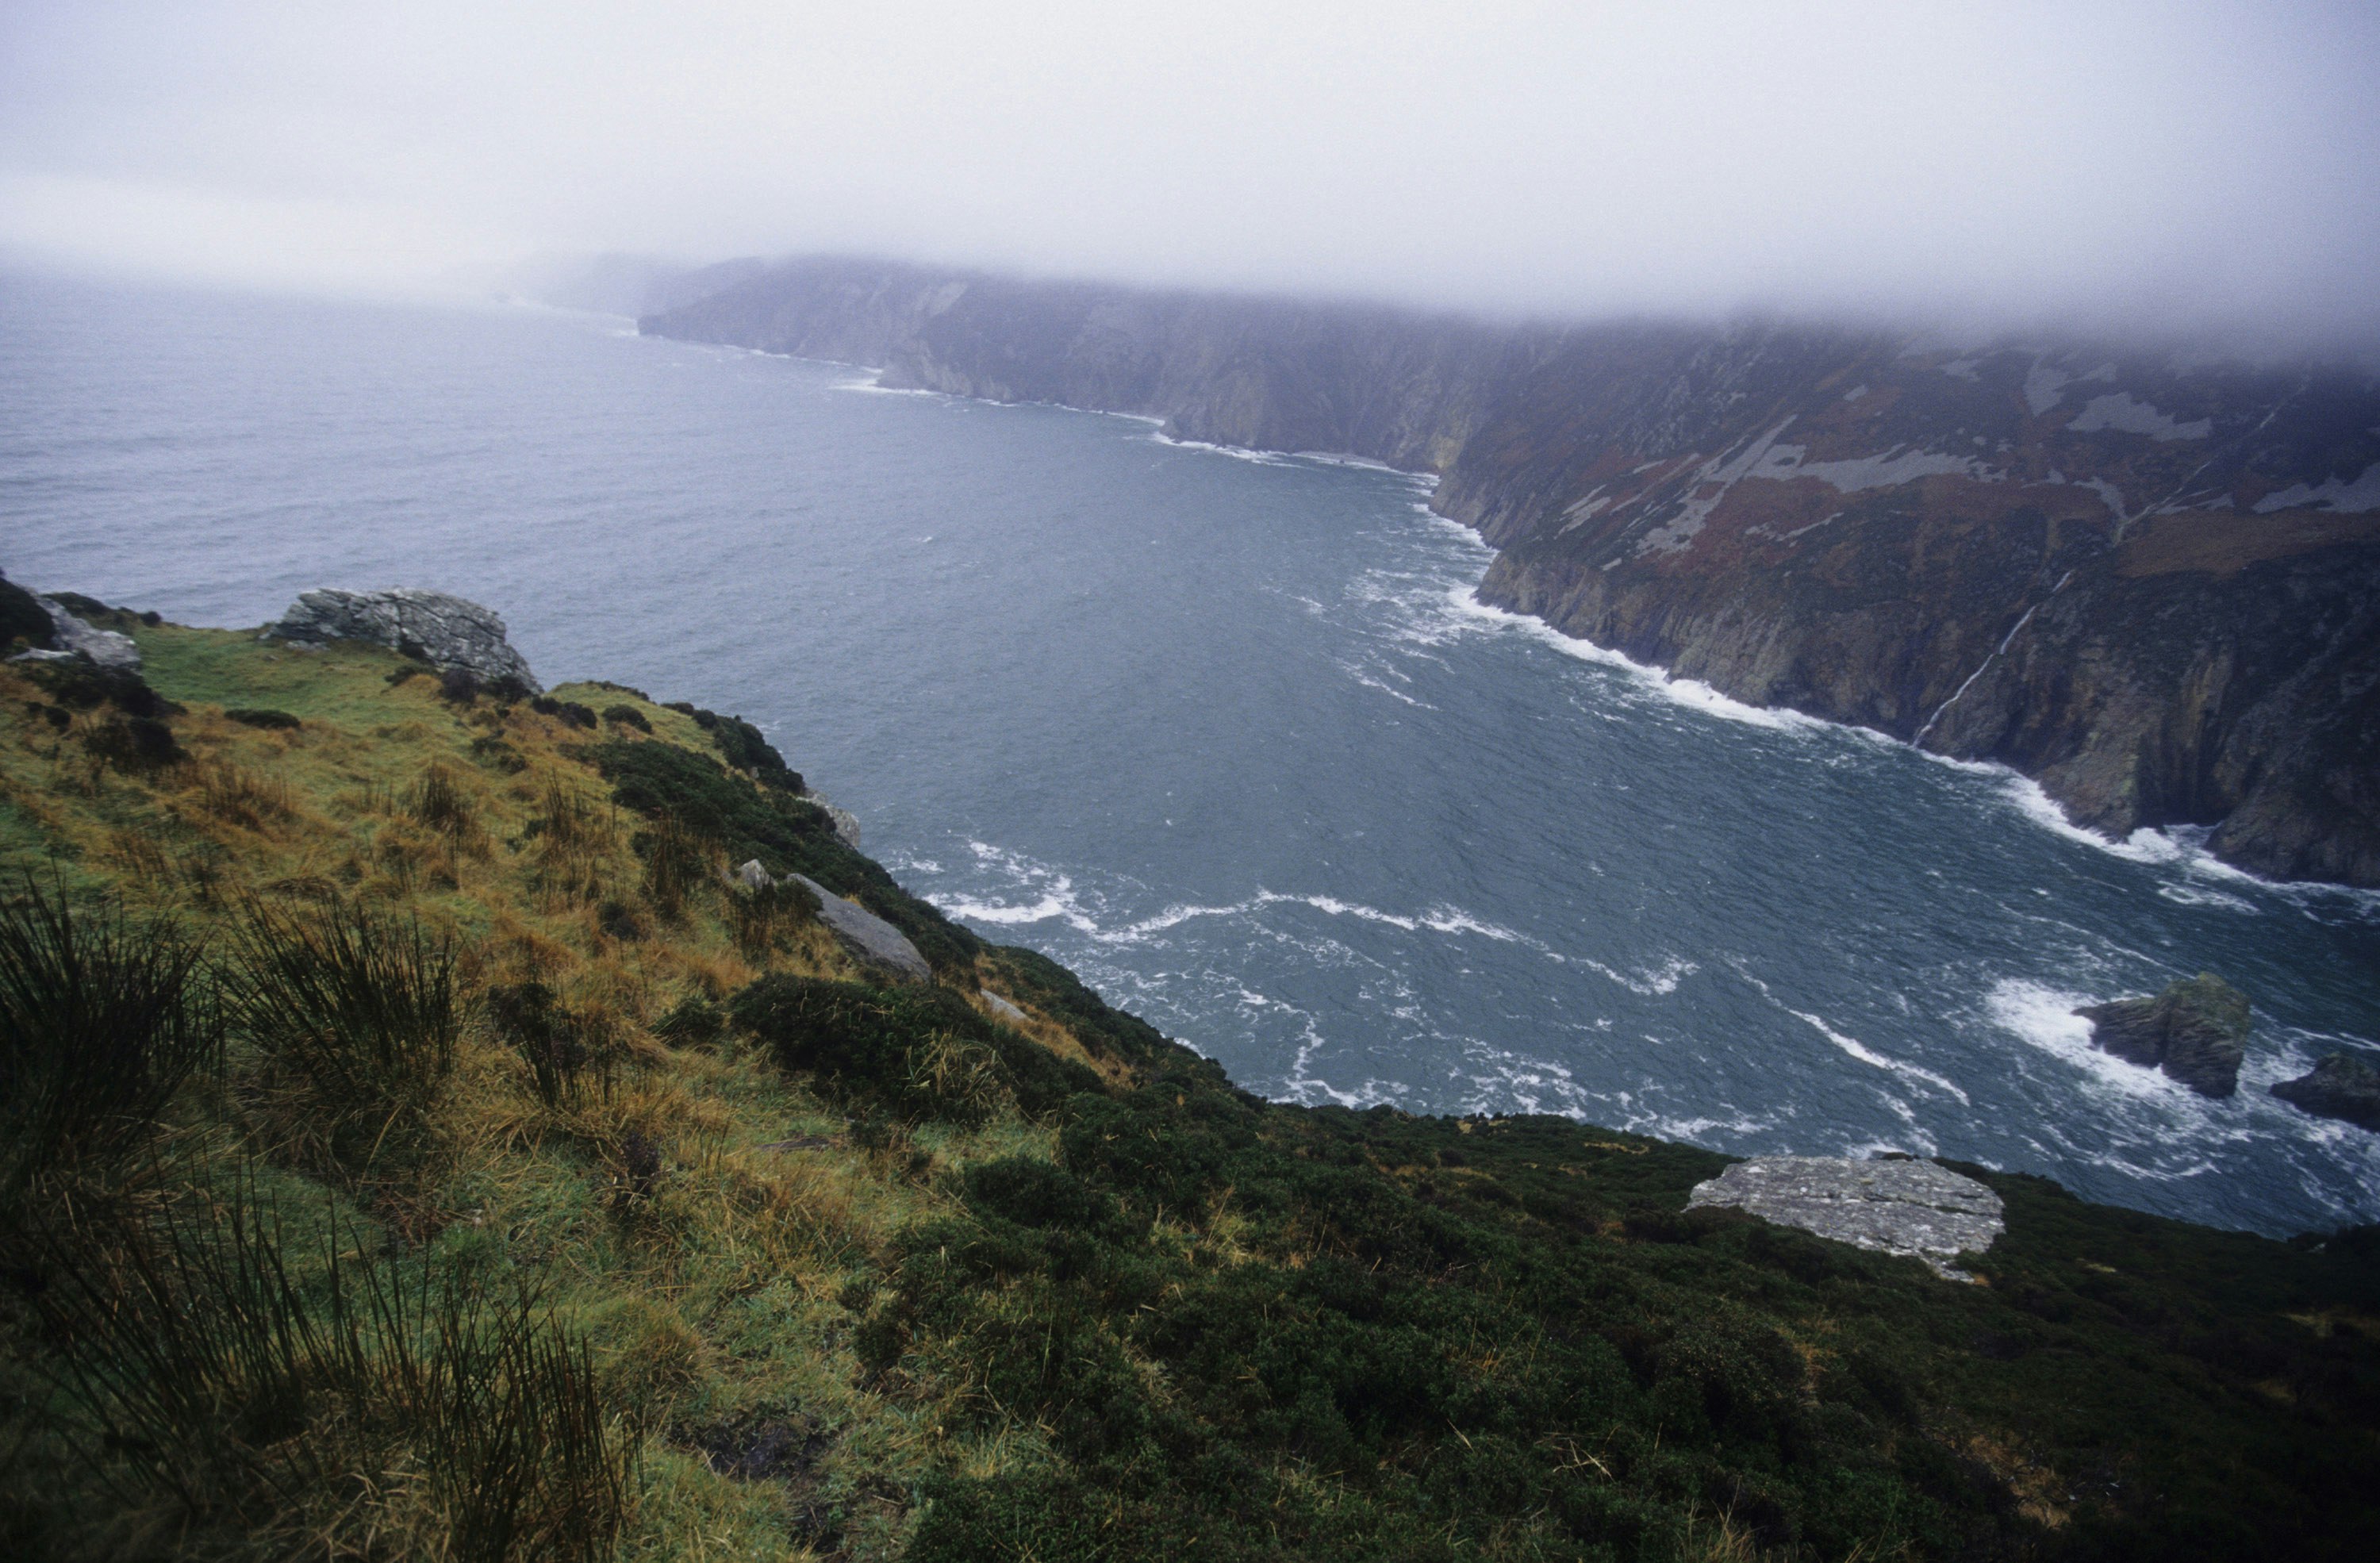 Sliabh Liag is three times higher than the Cliffs of Moher